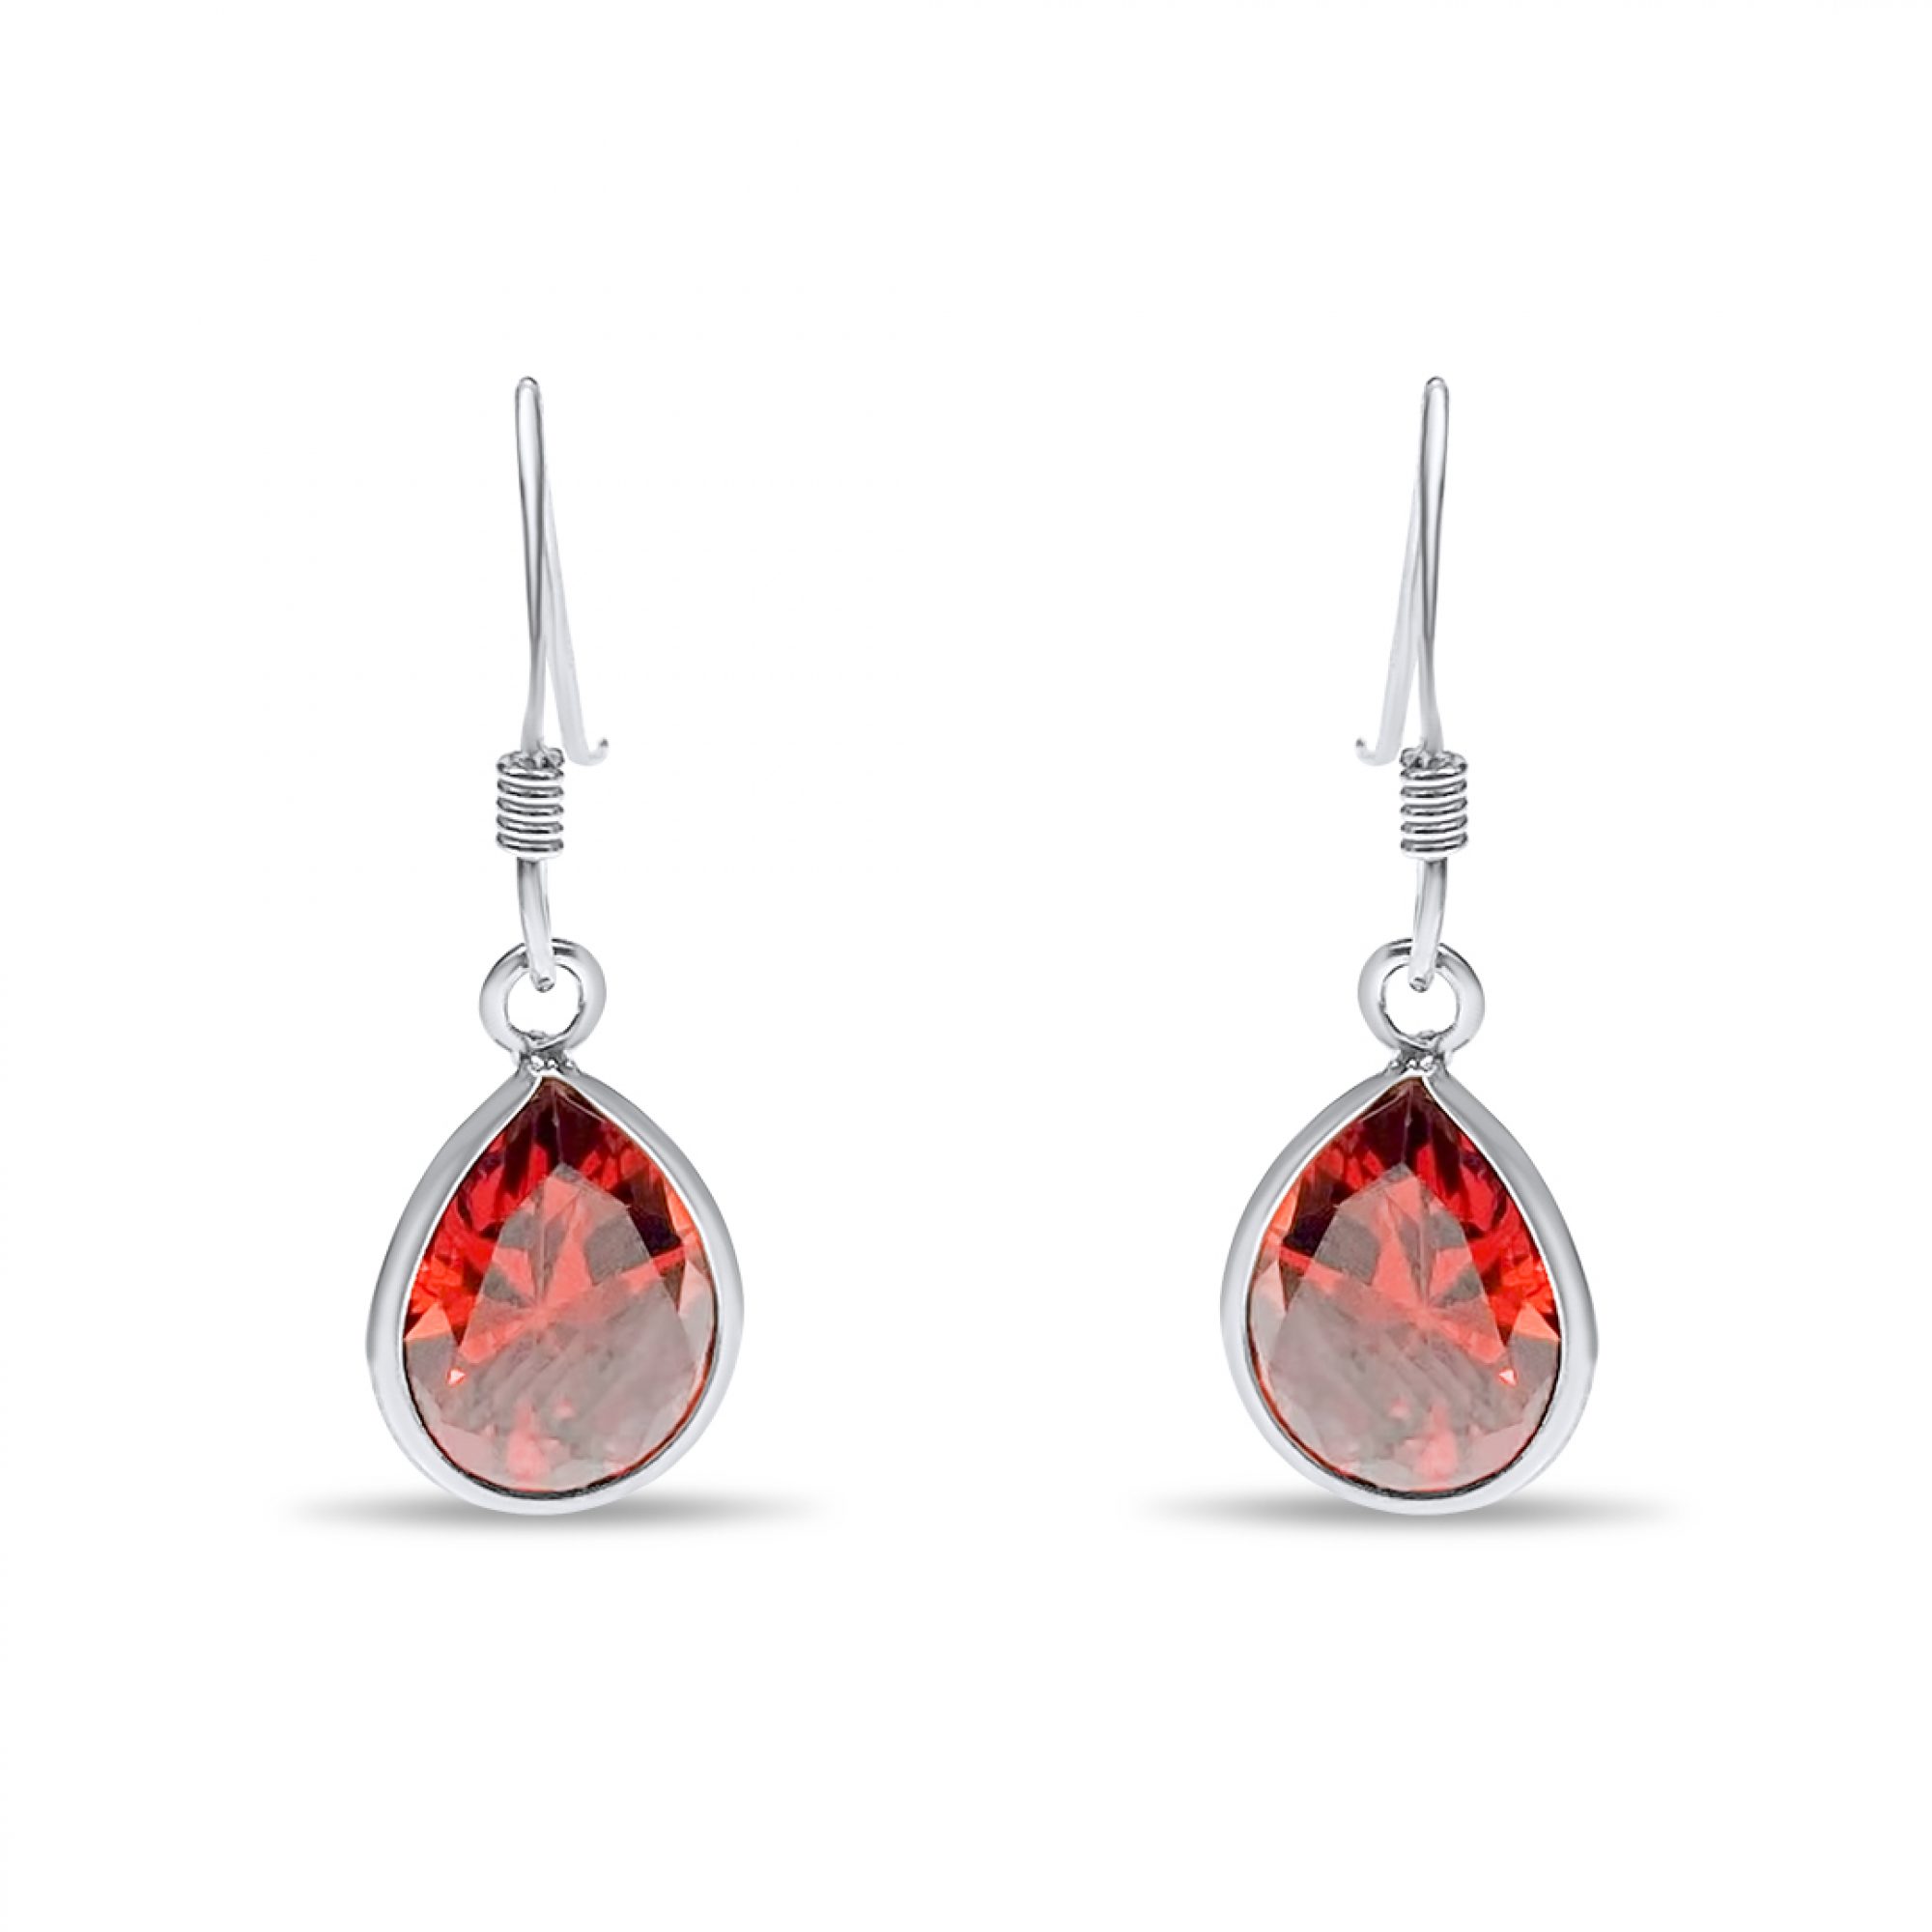 Silver dangle earrings with ruby stone